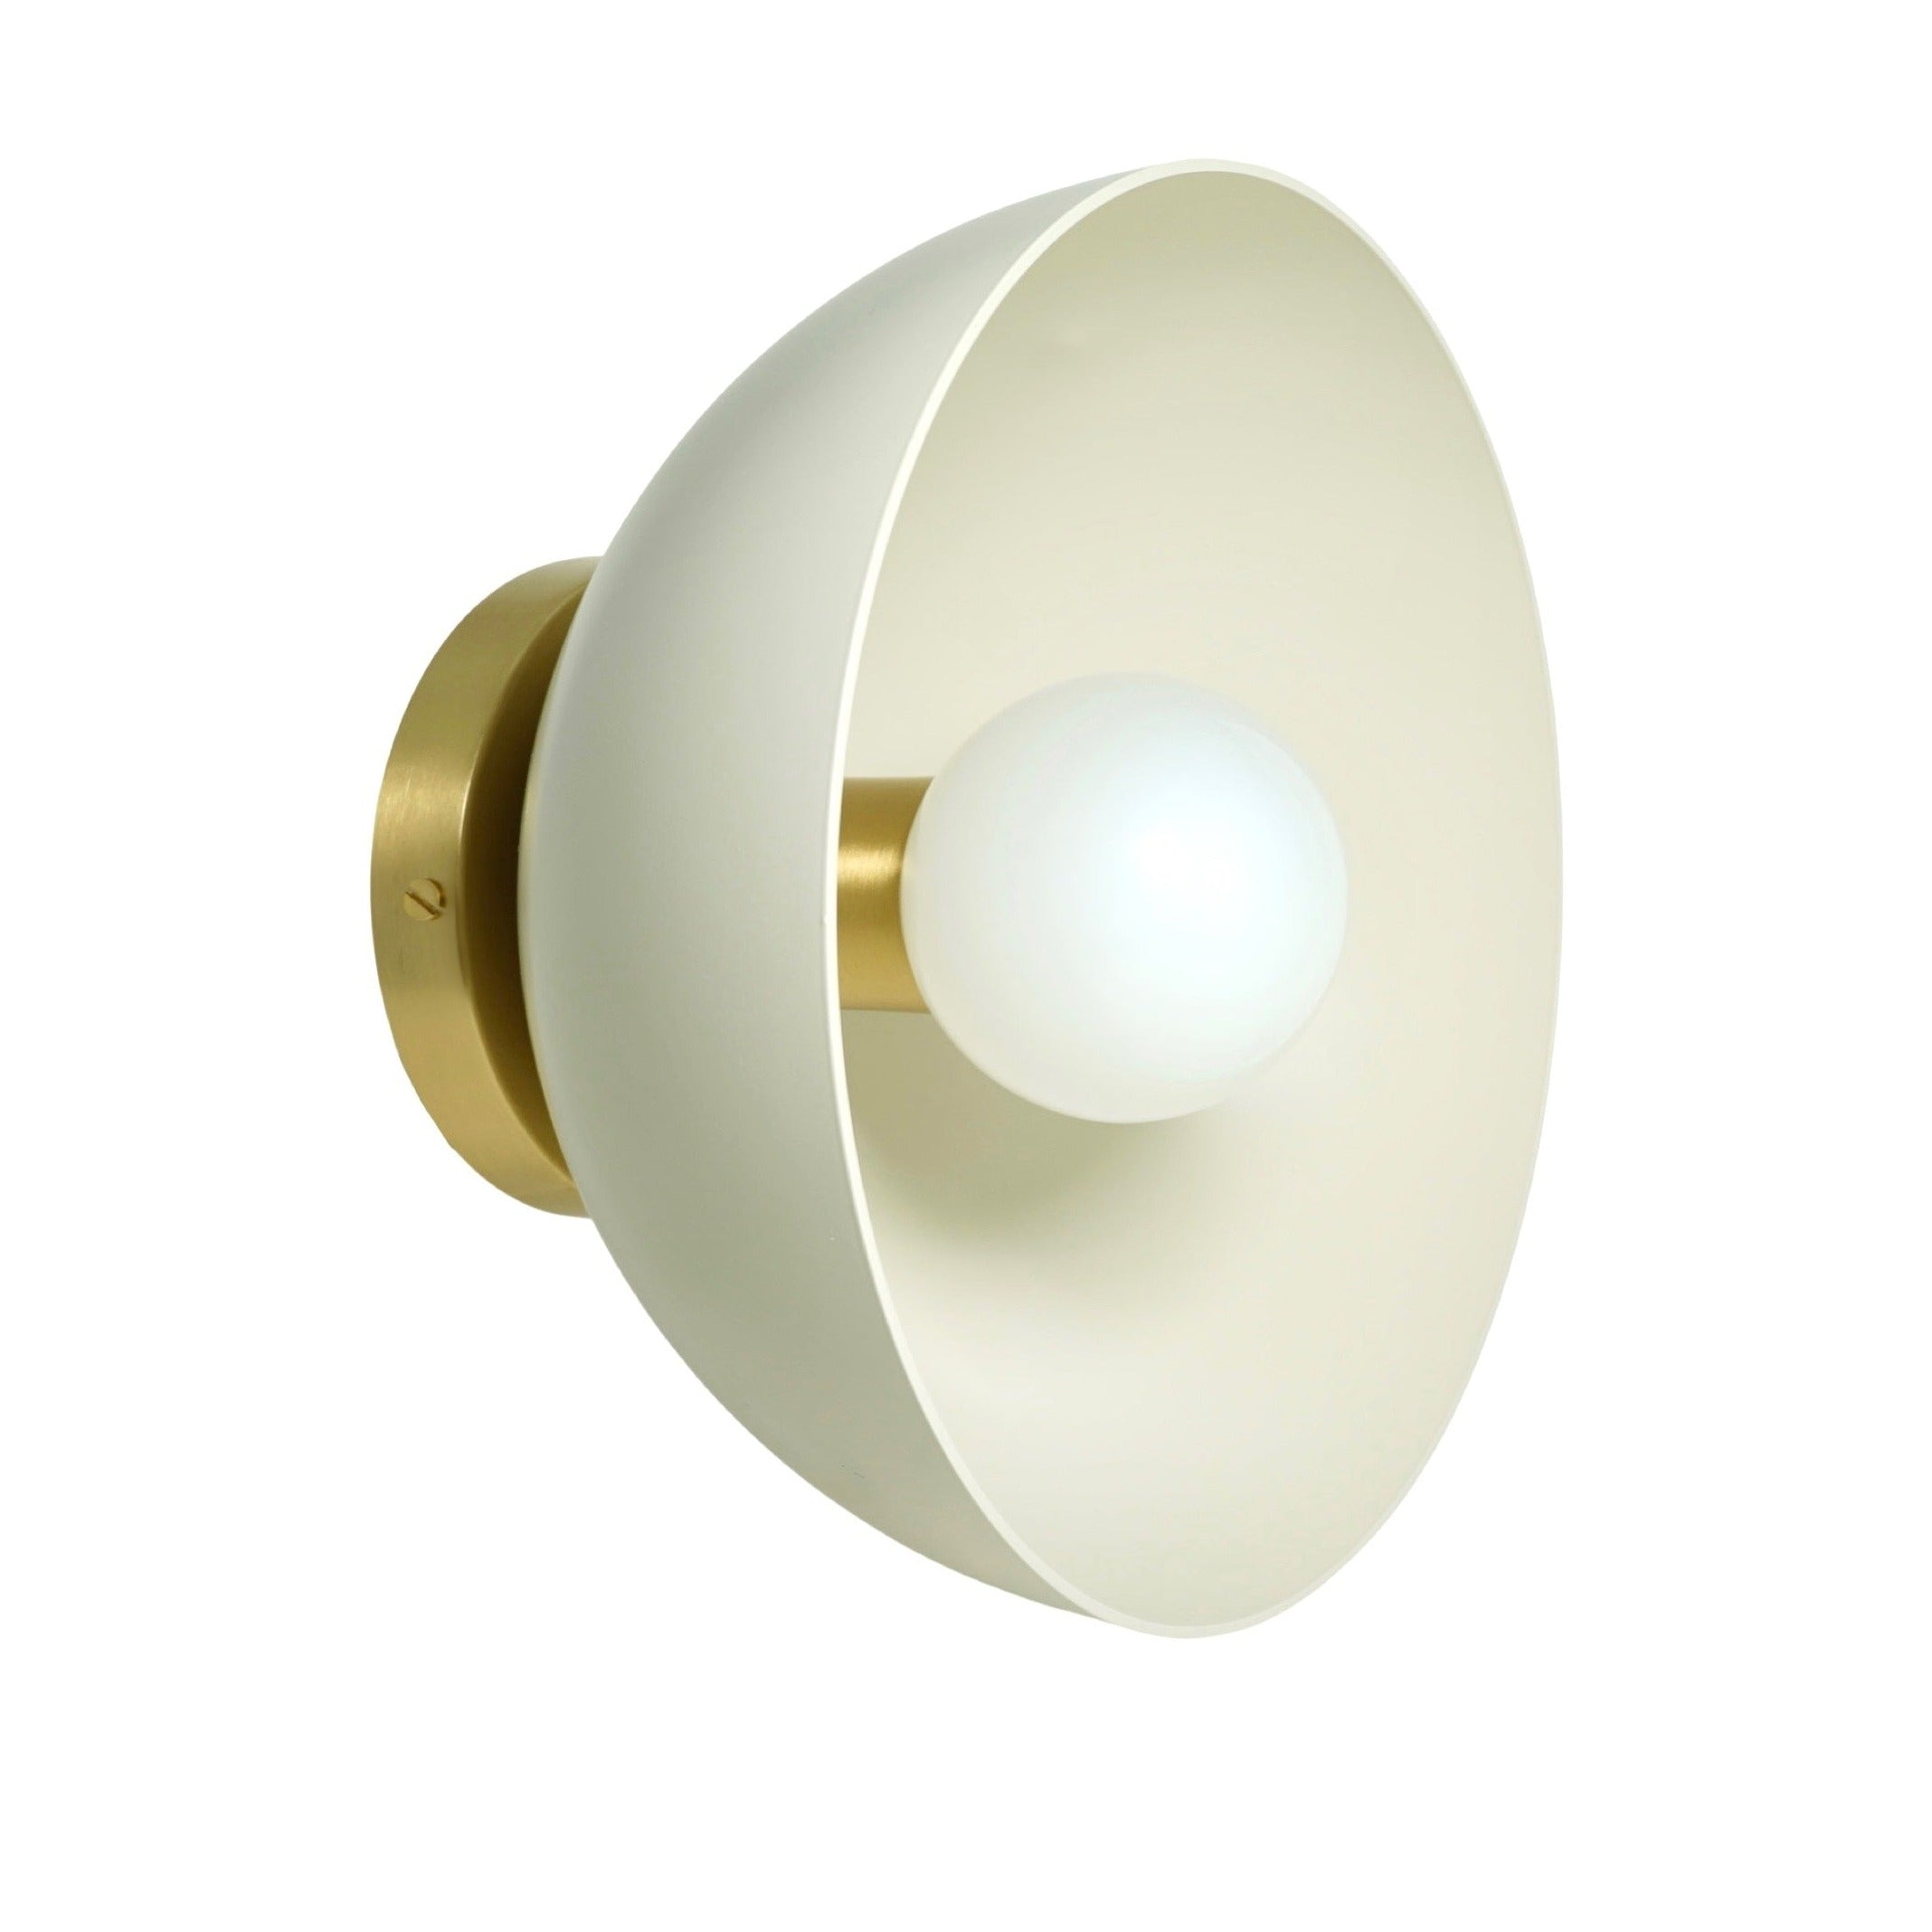 Brass and bone color hemi sconce 10-inch dutton brown lighting